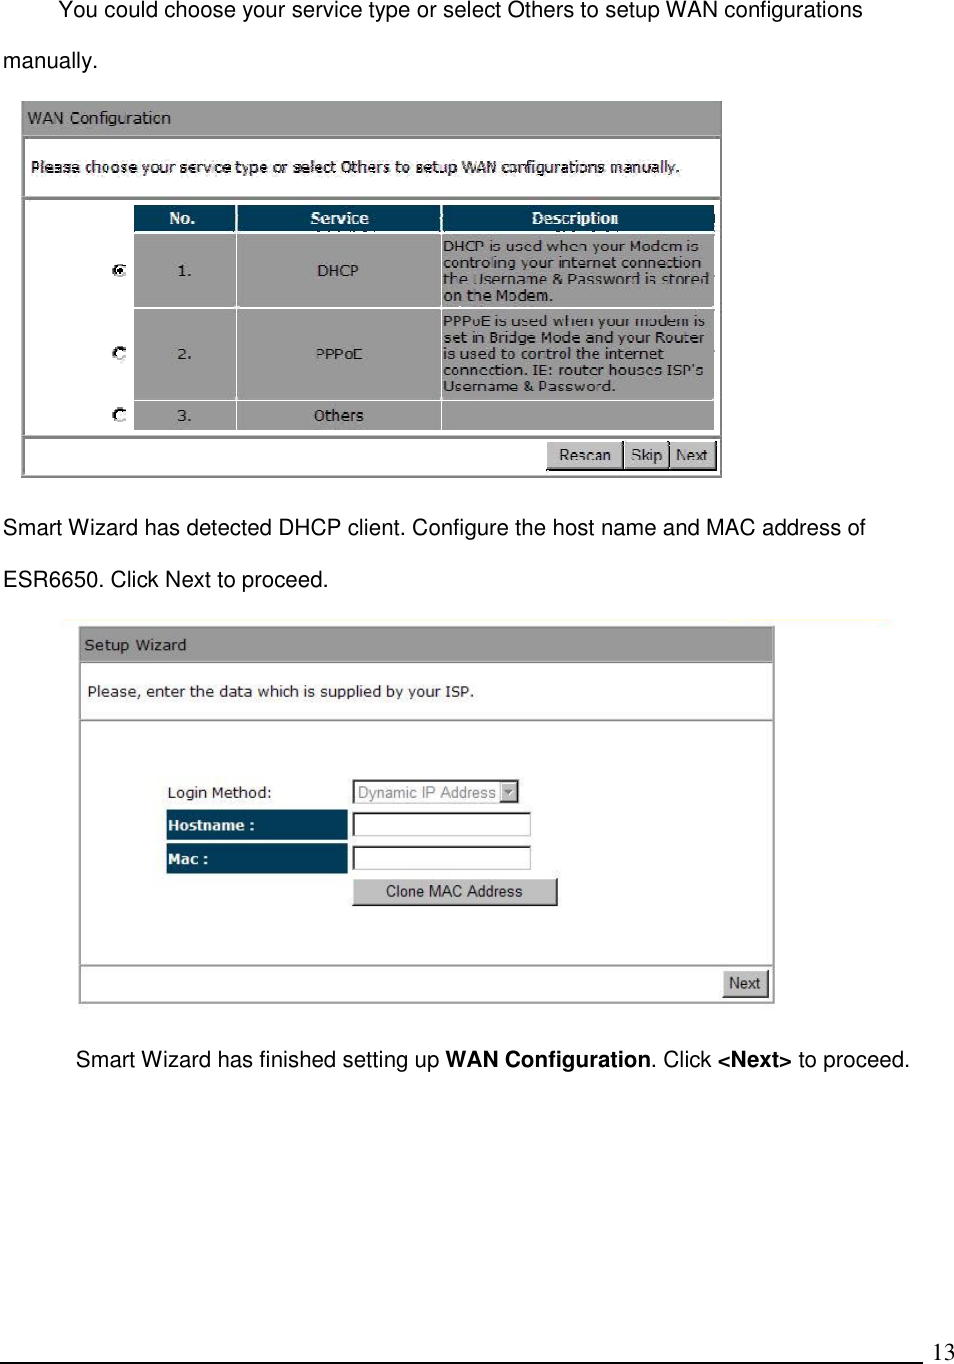   13 You could choose your service type or select Others to setup WAN configurations manually.  Smart Wizard has detected DHCP client. Configure the host name and MAC address of ESR6650. Click Next to proceed.  Smart Wizard has finished setting up WAN Configuration. Click &lt;Next&gt; to proceed. 